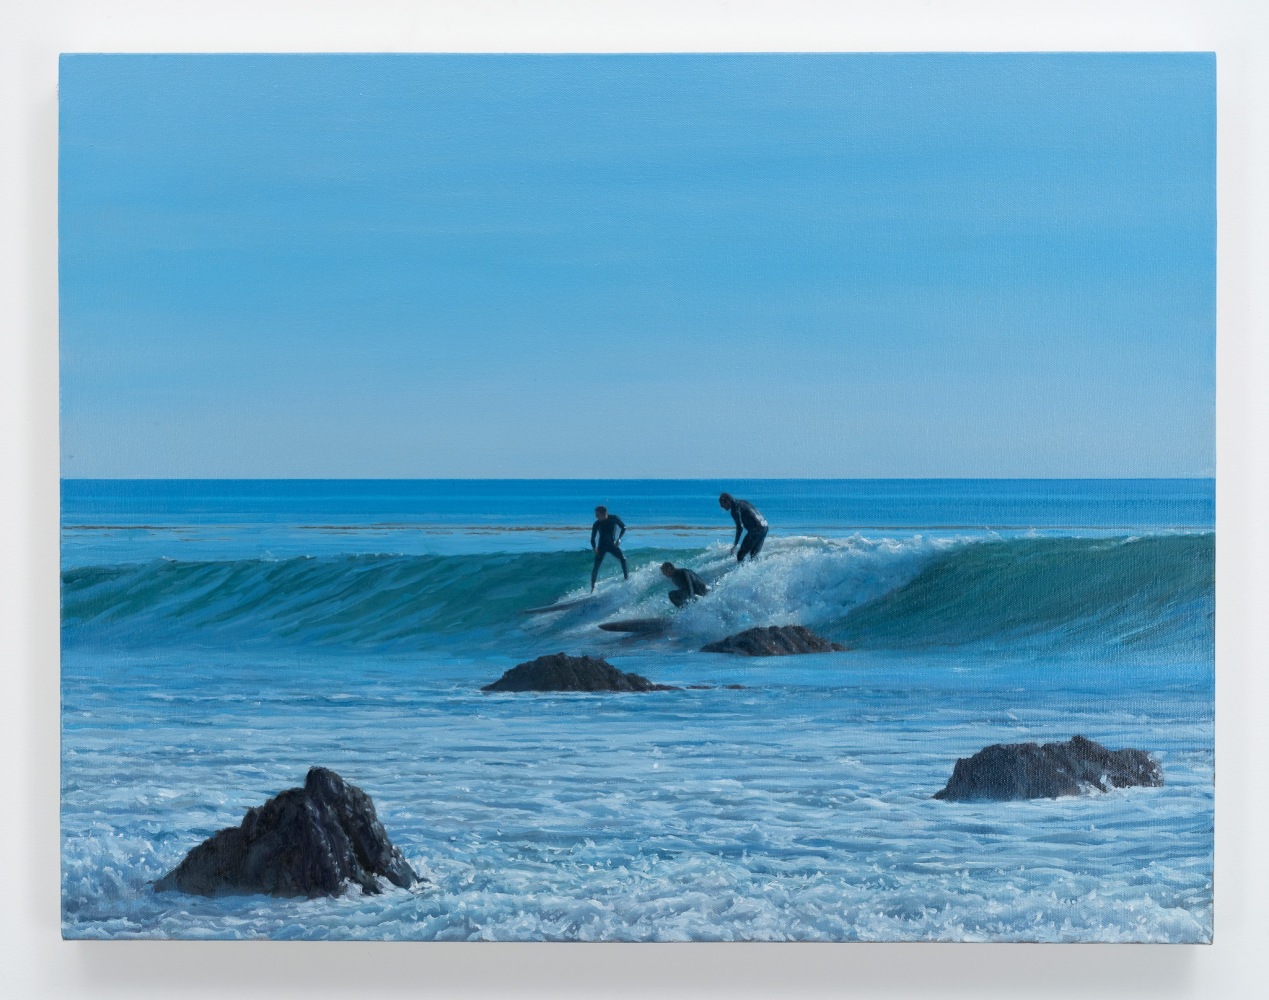 Tim Gardner

Three Surfers

2017

Oil on canvas

20 1/8 x 26 1/4 inches (51.1 x 66.7 cm)

Signed, dated verso

TG 536

&amp;nbsp;

INQUIRE